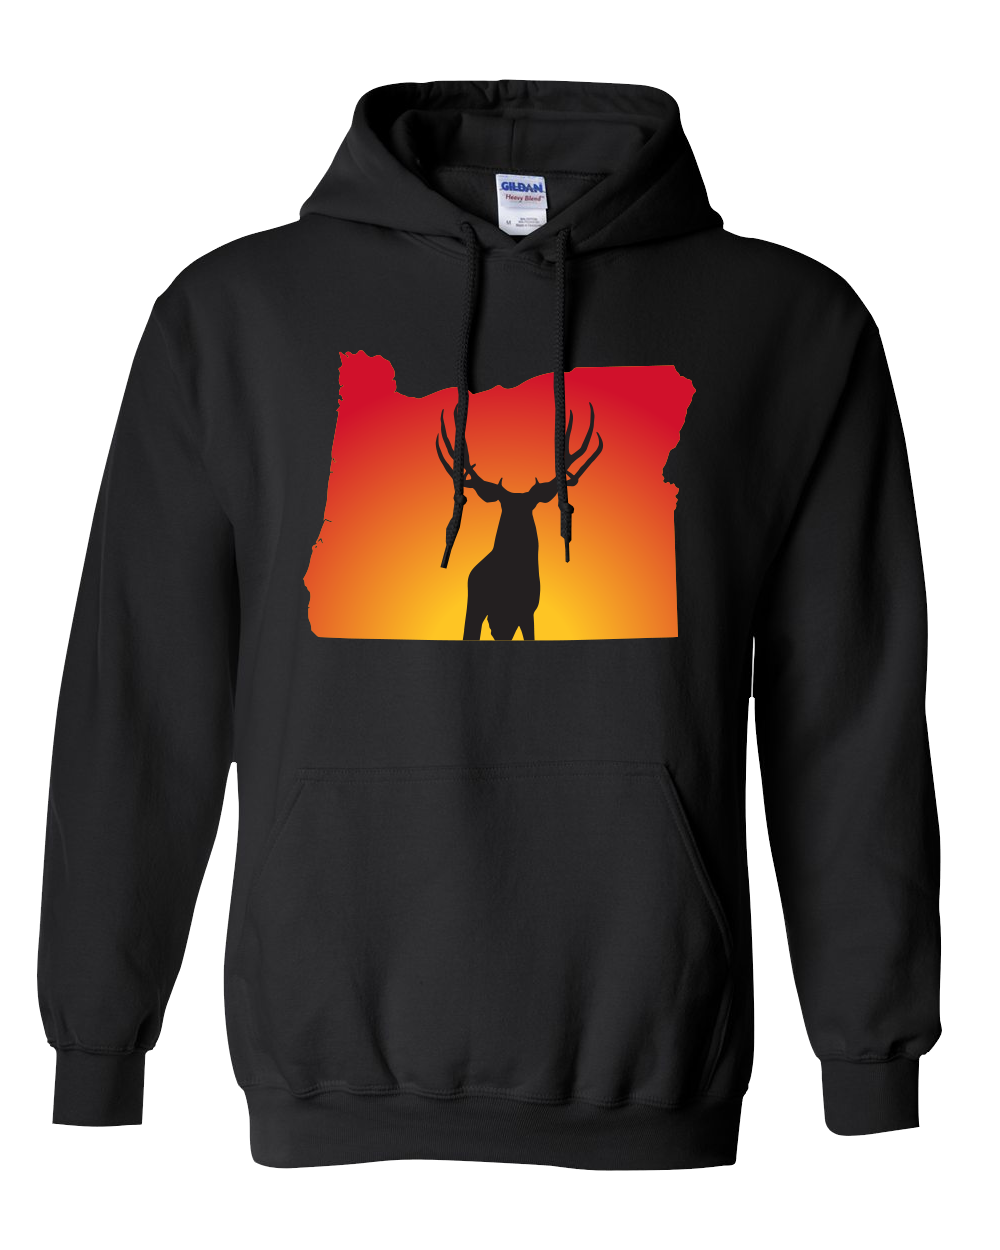 Pullover Hooded Sweatshirt Oregon Black Mule Deer Vibrant Design High Quality Tight Knit Ring Spun Low Maintenance Cotton Printed With The Newest Available Color Transfer Technology